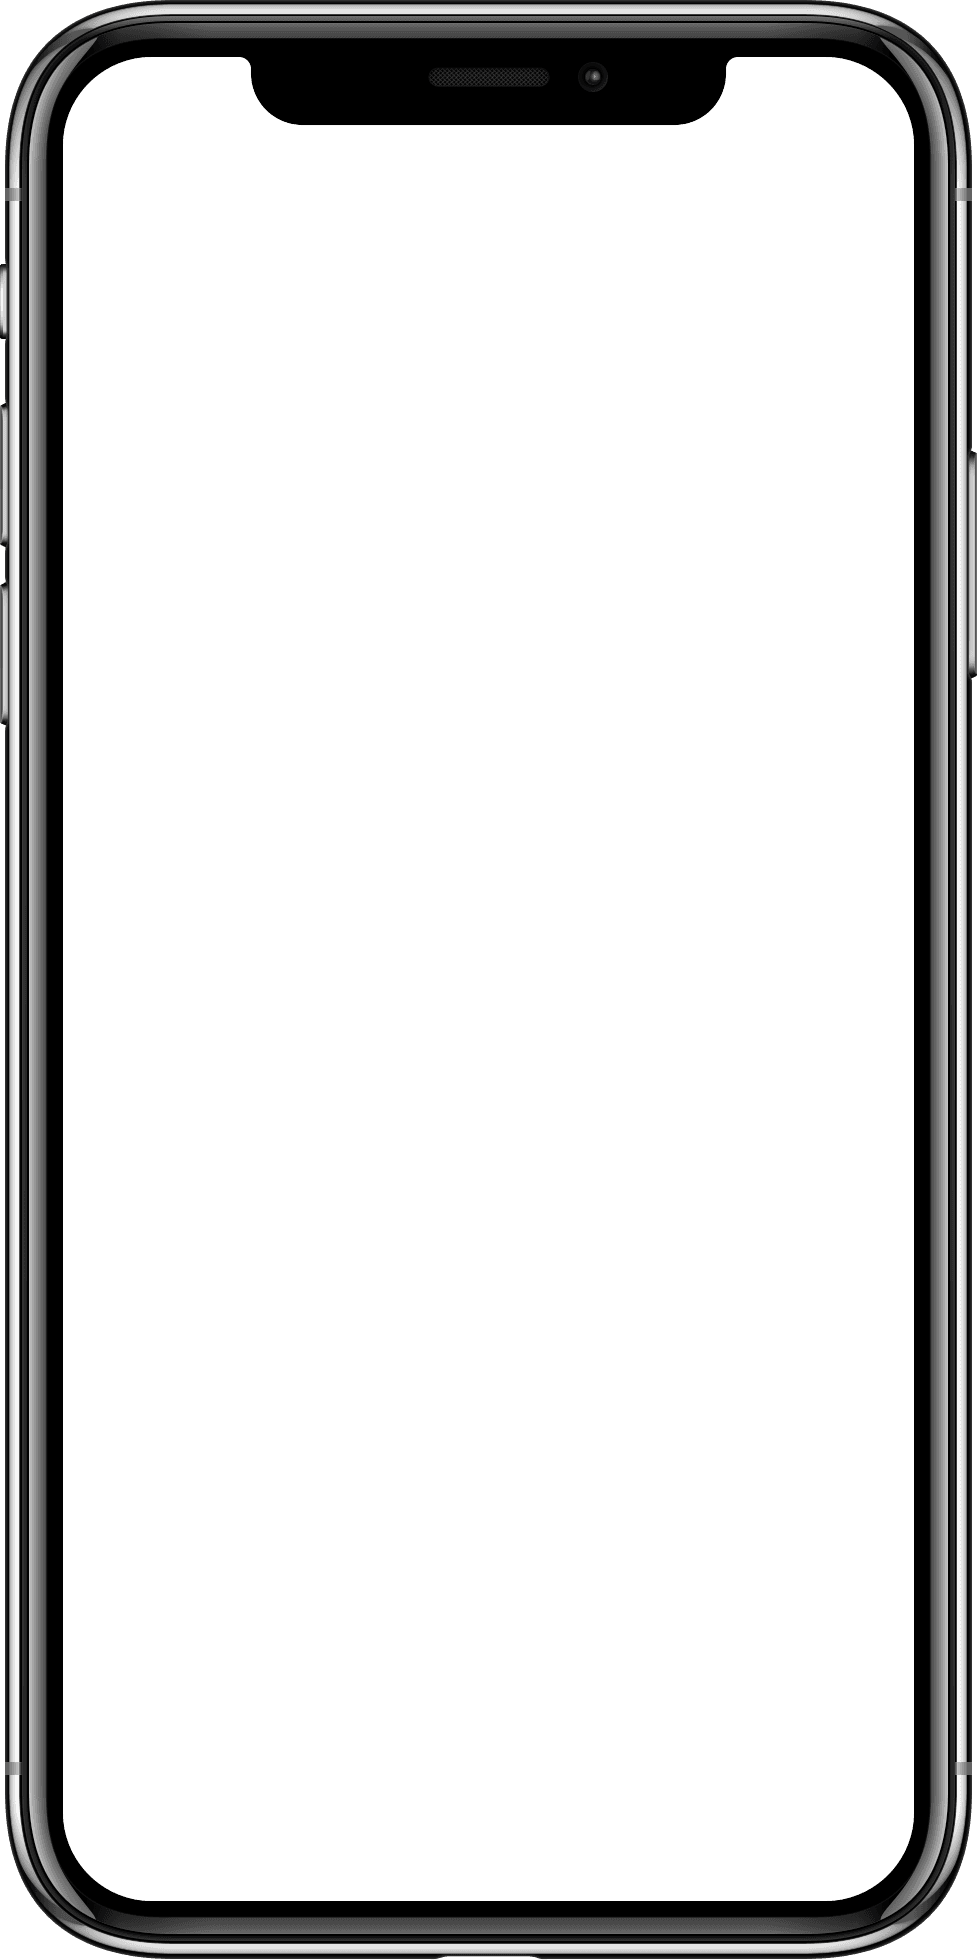 Blank Iphone Png.